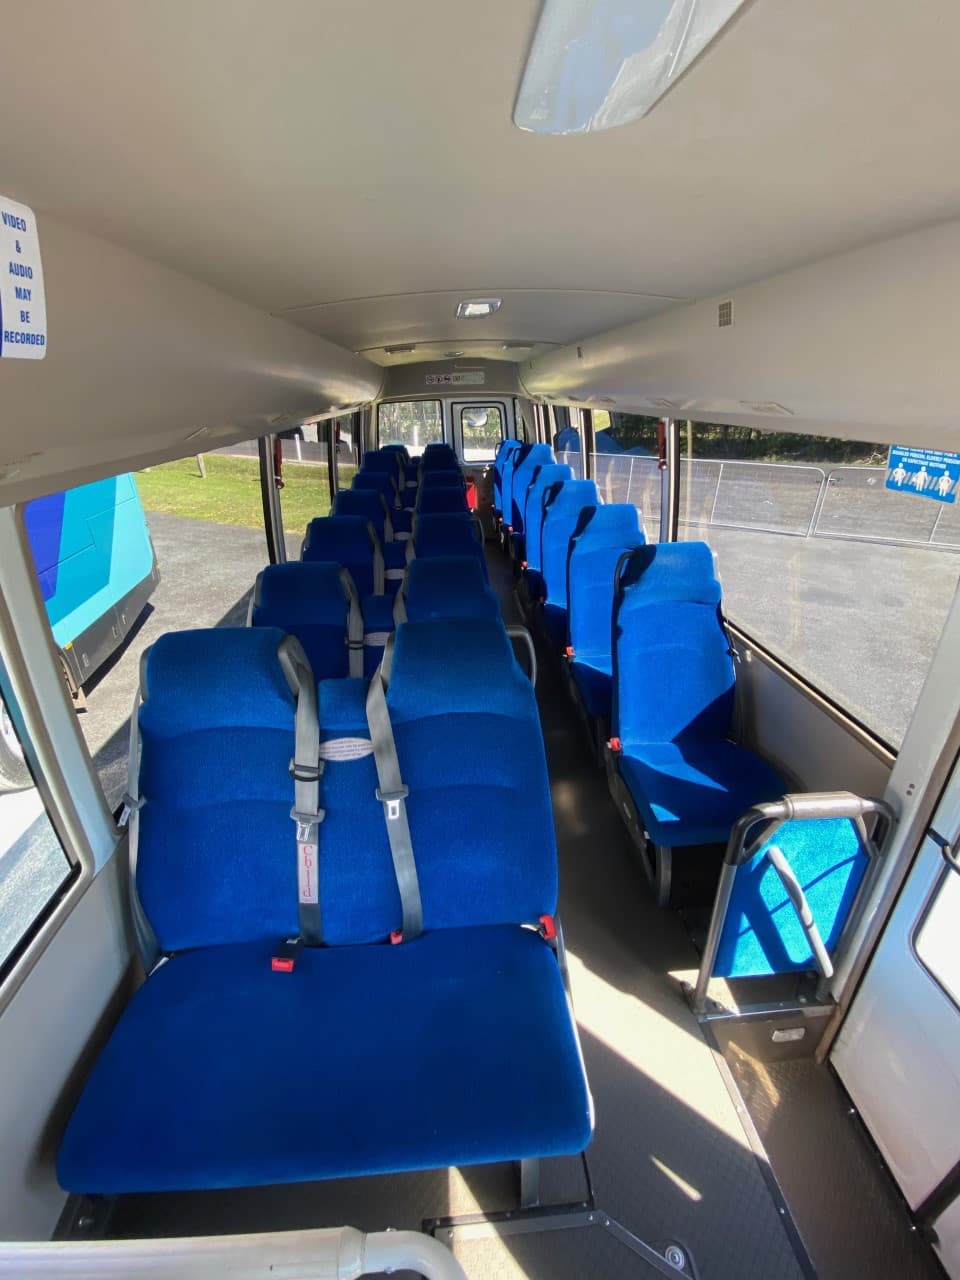 Blue Sit Cover of Bus Passenger Seats  — Bus Service Operates in the Tweed Shire, NSW